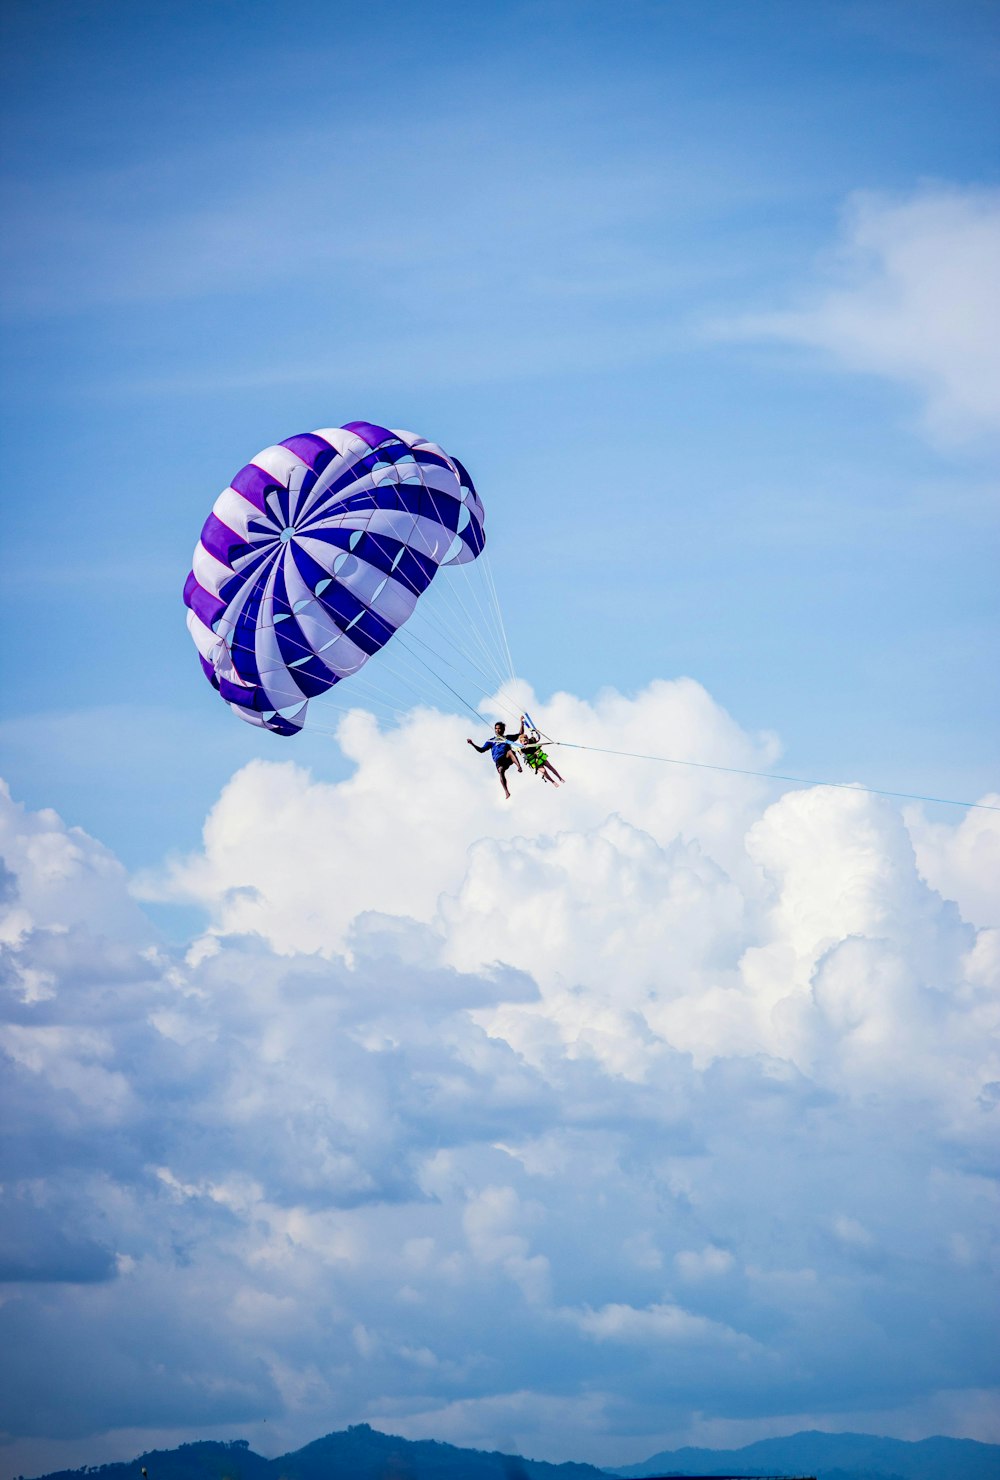 person riding on red and blue parachute under blue sky during daytime